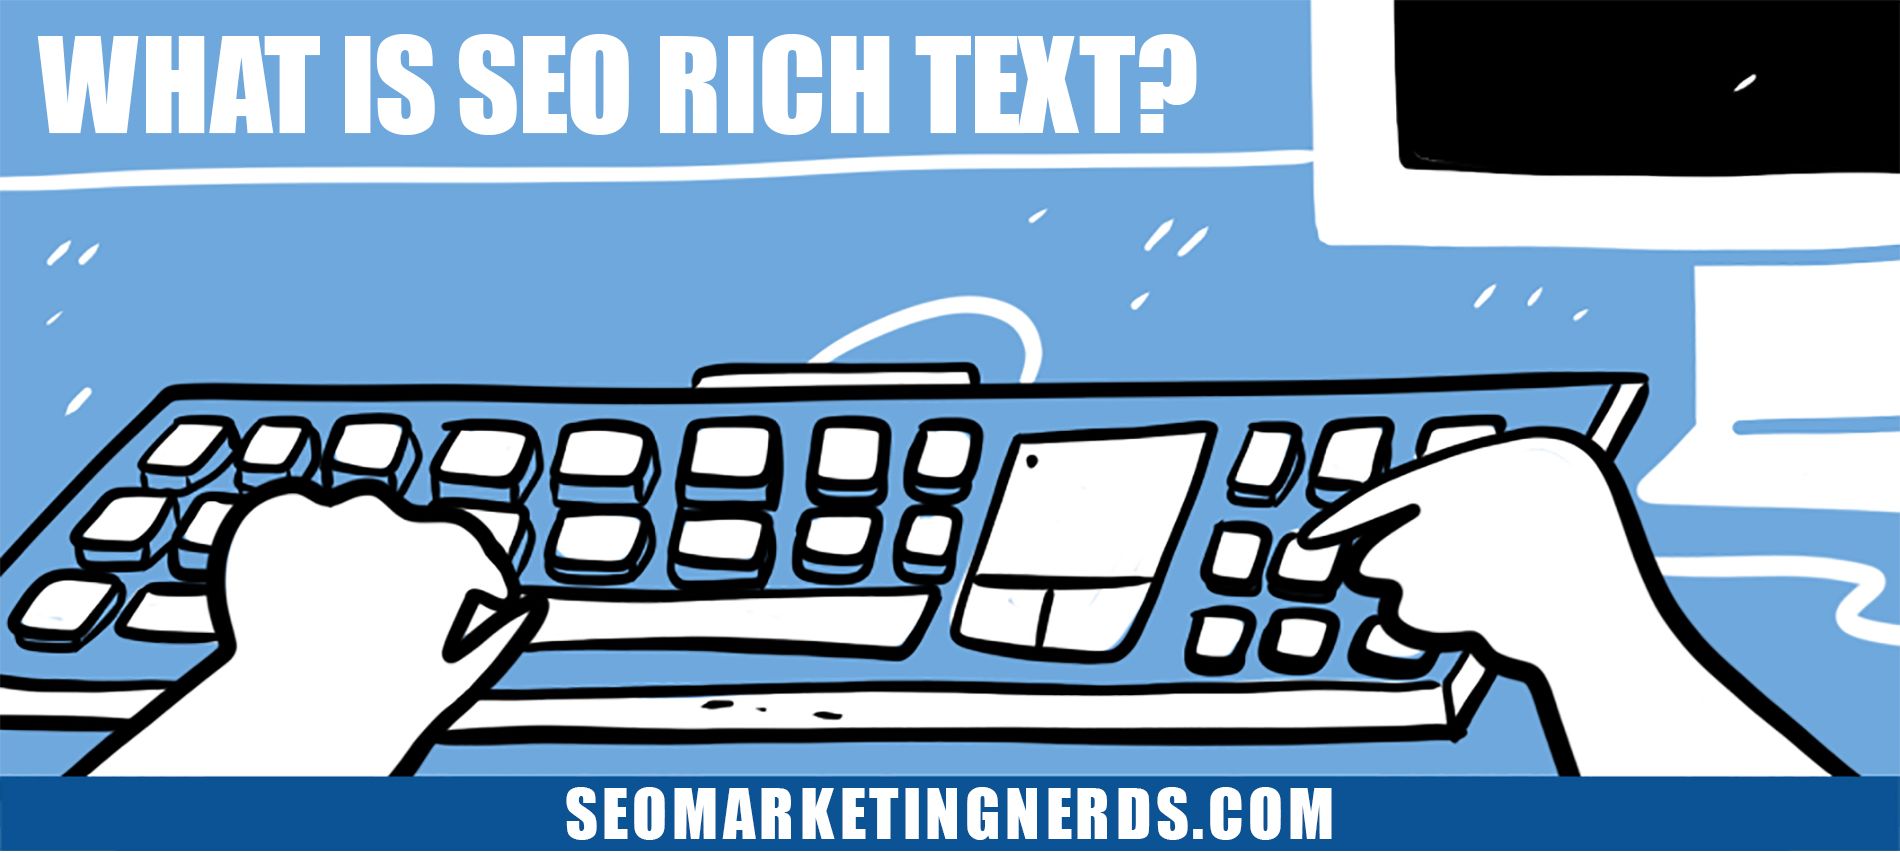 What is SEO rich text?